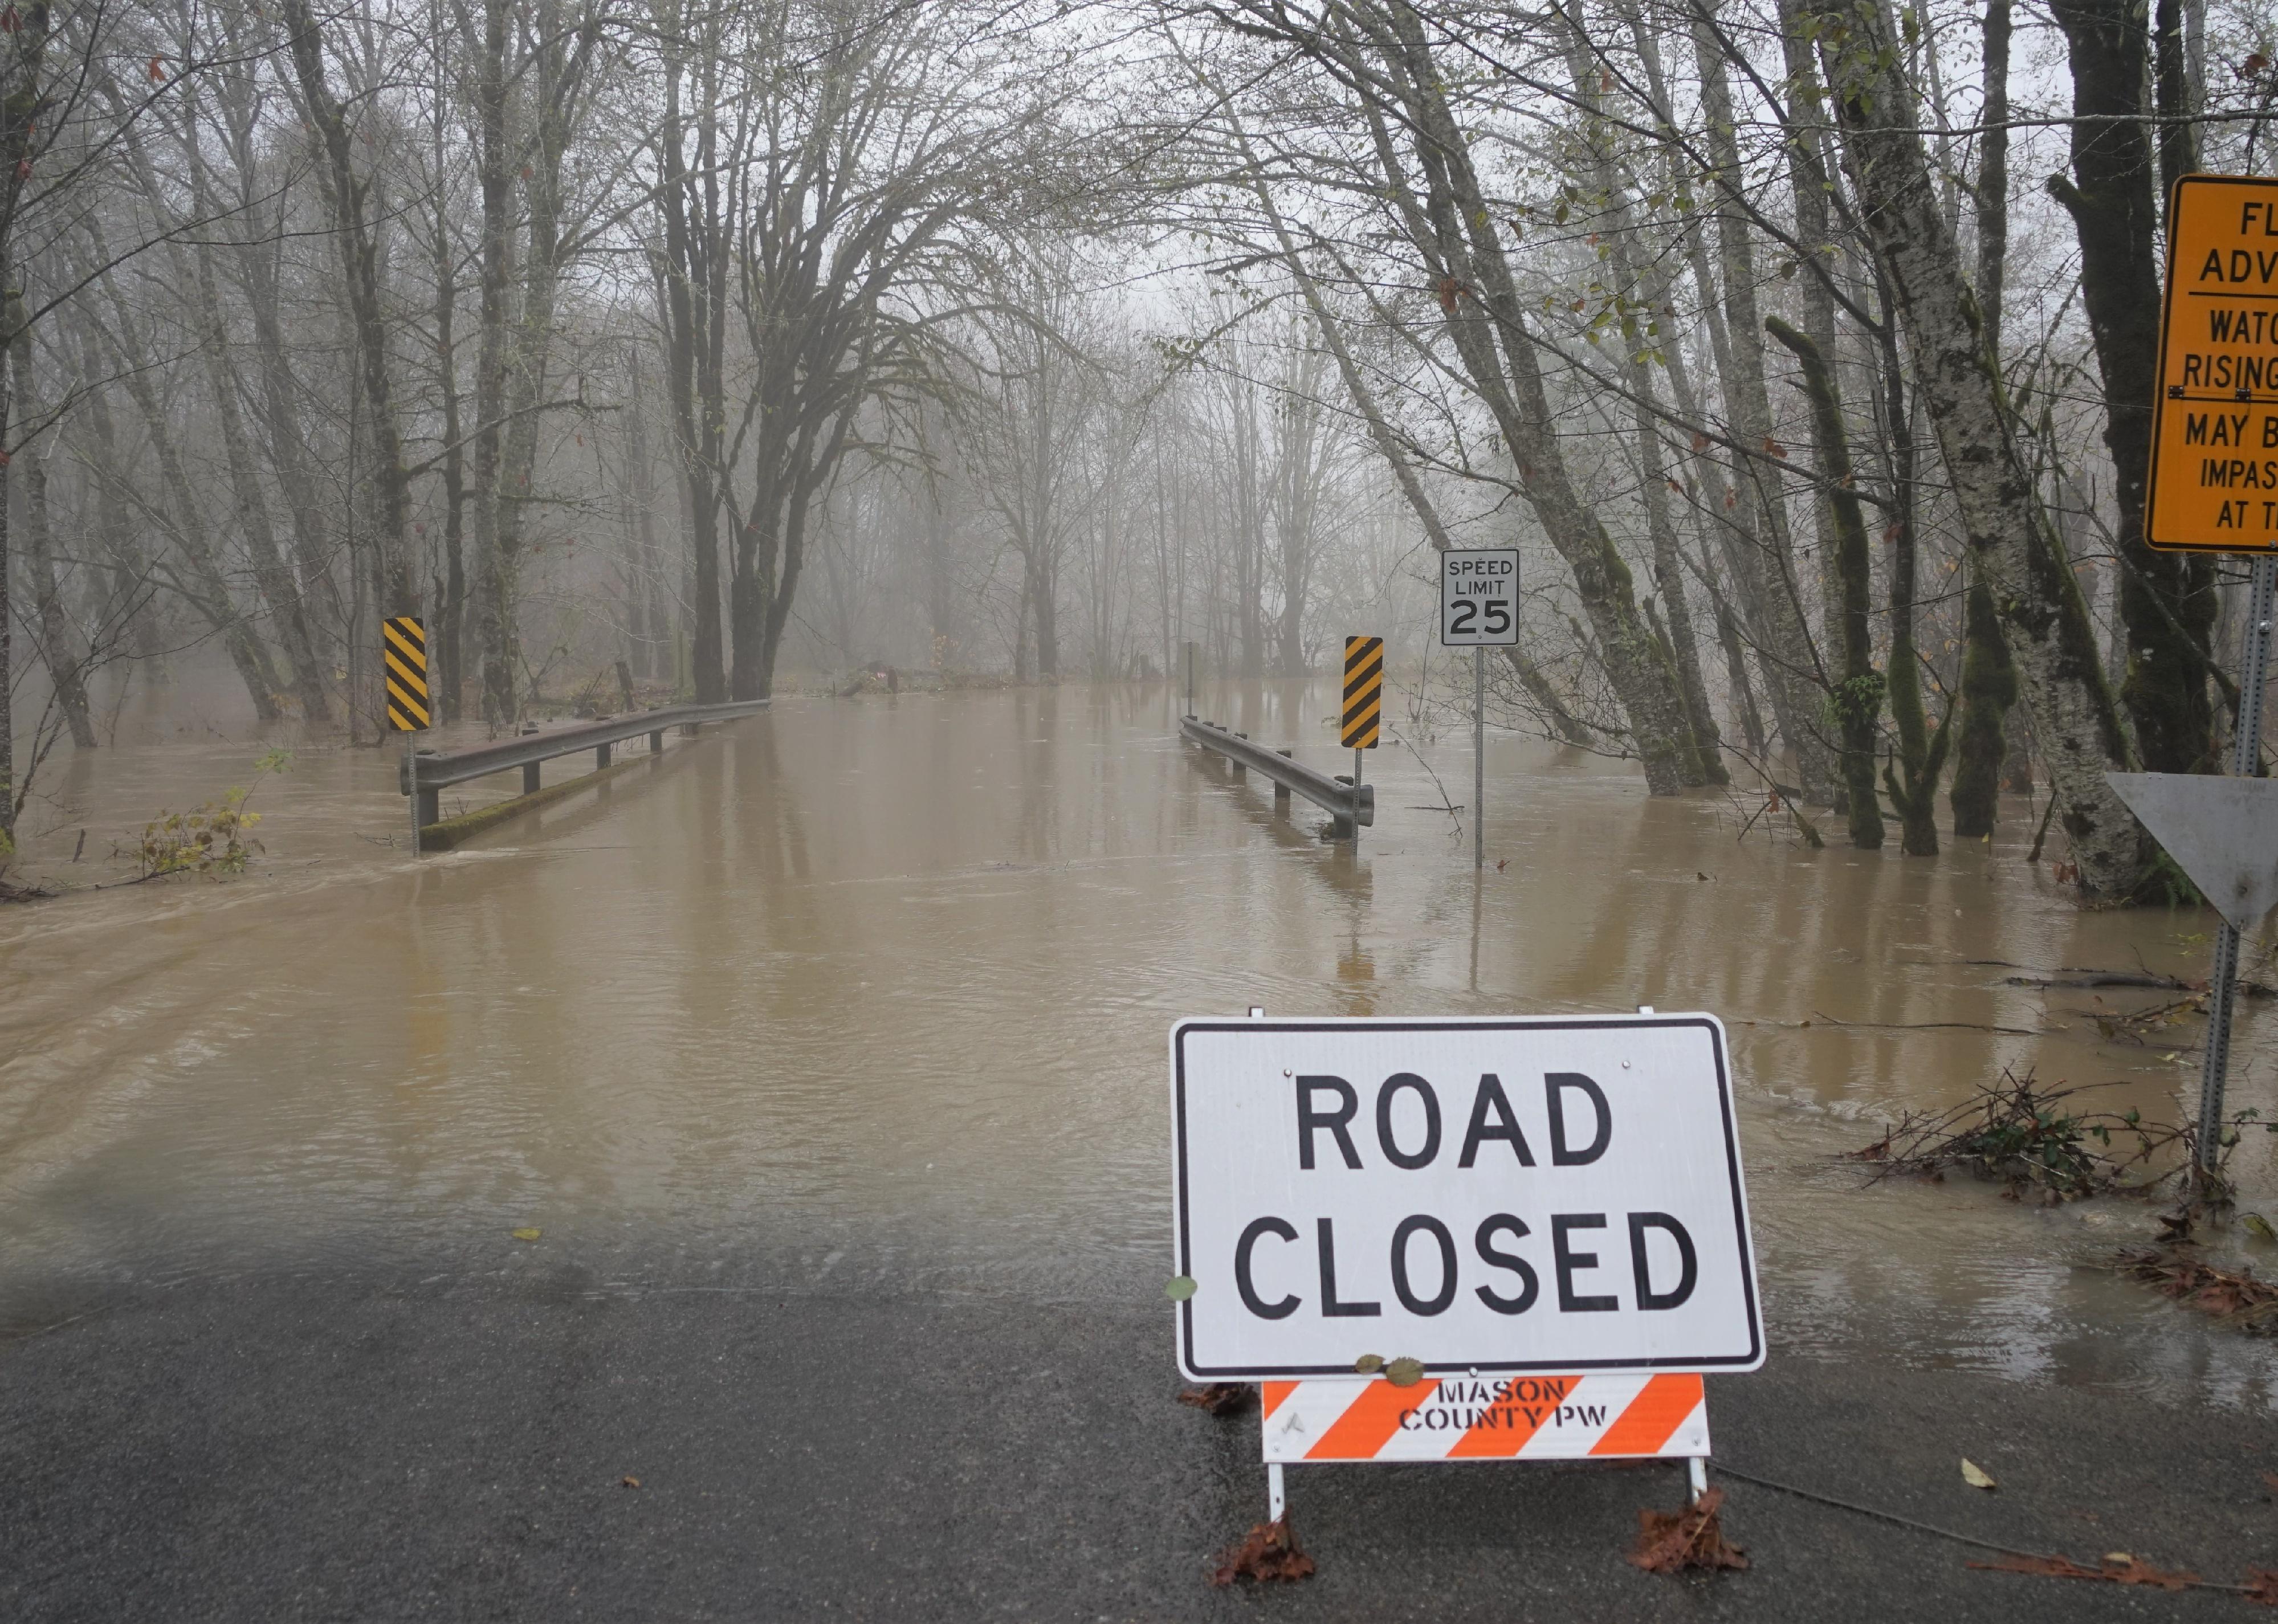 Flood zone area and road closed sign.